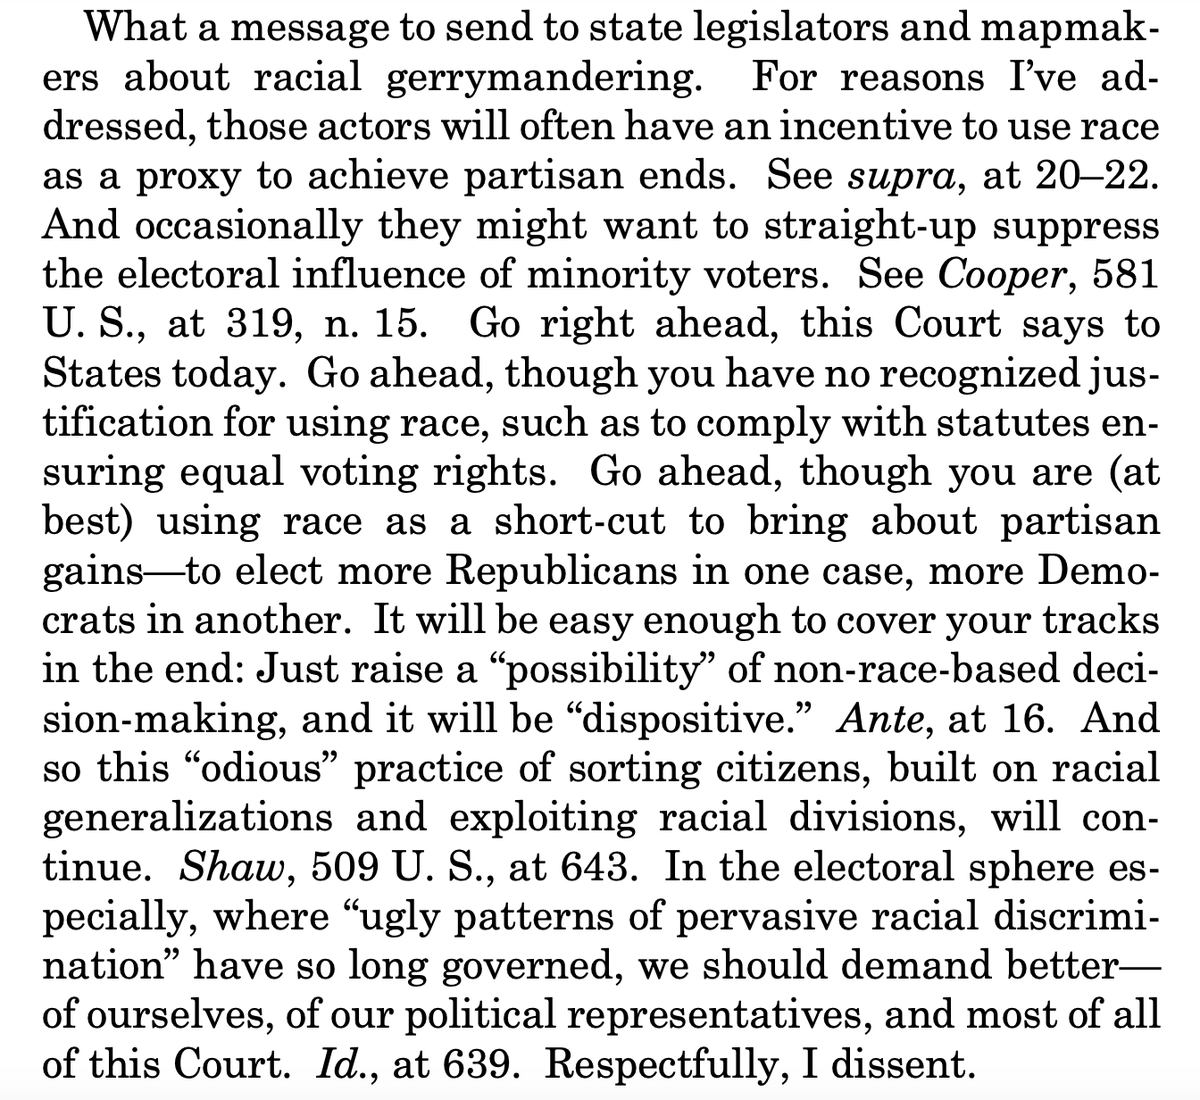 Here's Justice Kagan again, slamming the conservative supermajority for effectively greenlighting racial gerrymandering. 'So this 'odious' practice of sorting citizens, built on racial generalizations and exploiting racial divisions, will continue.' supremecourt.gov/opinions/23pdf…